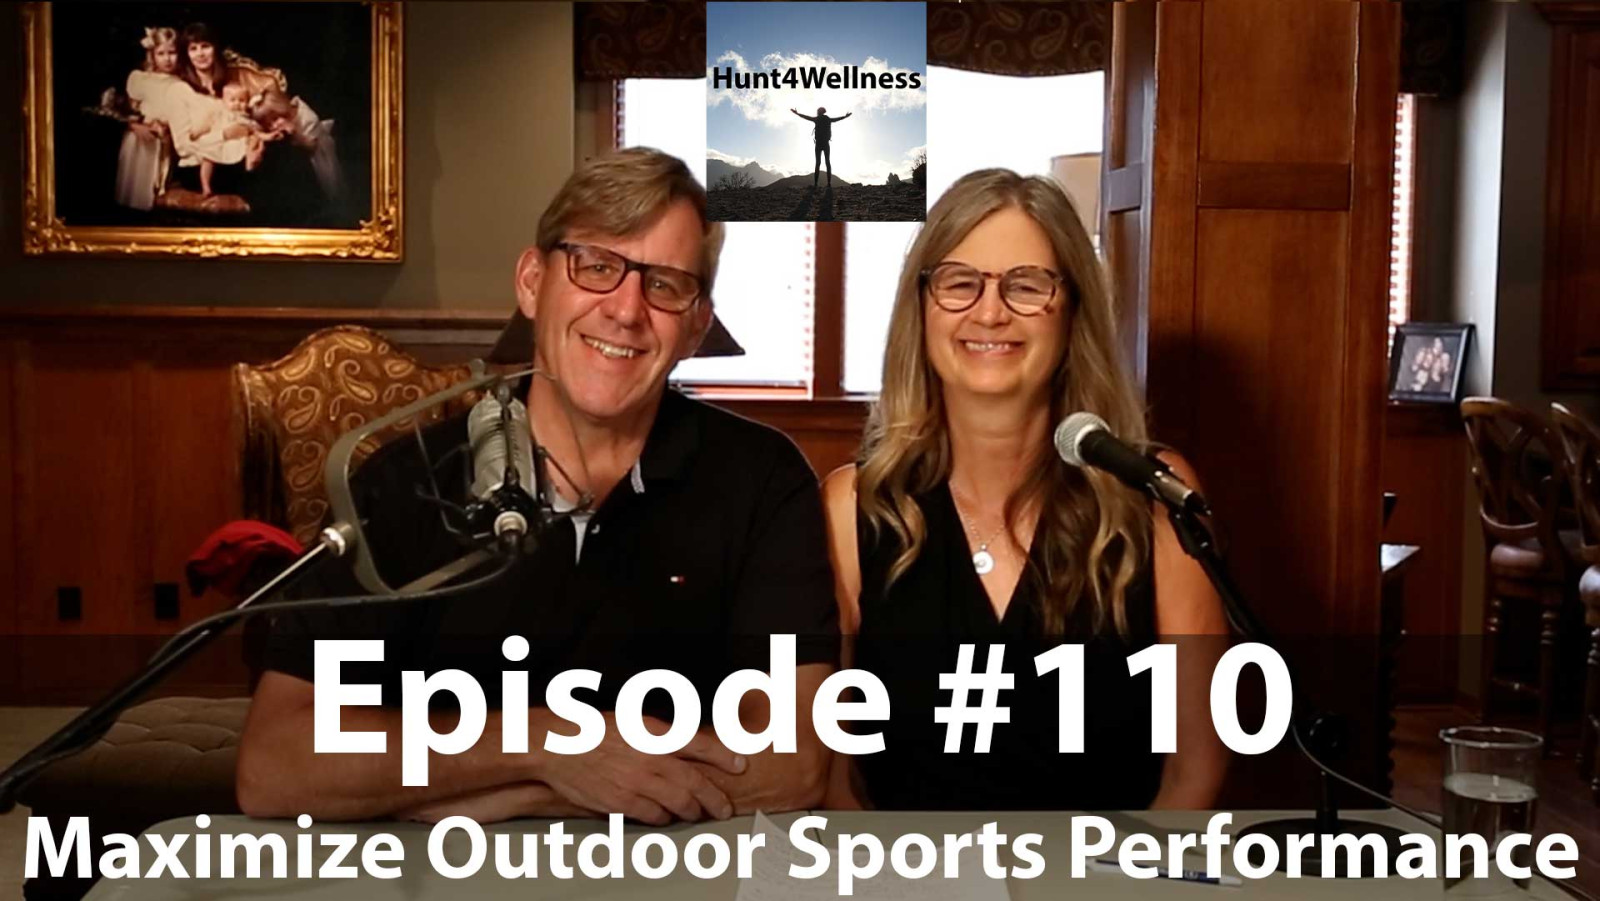 Episode #110 - Maximize Outdoor Sports Performance